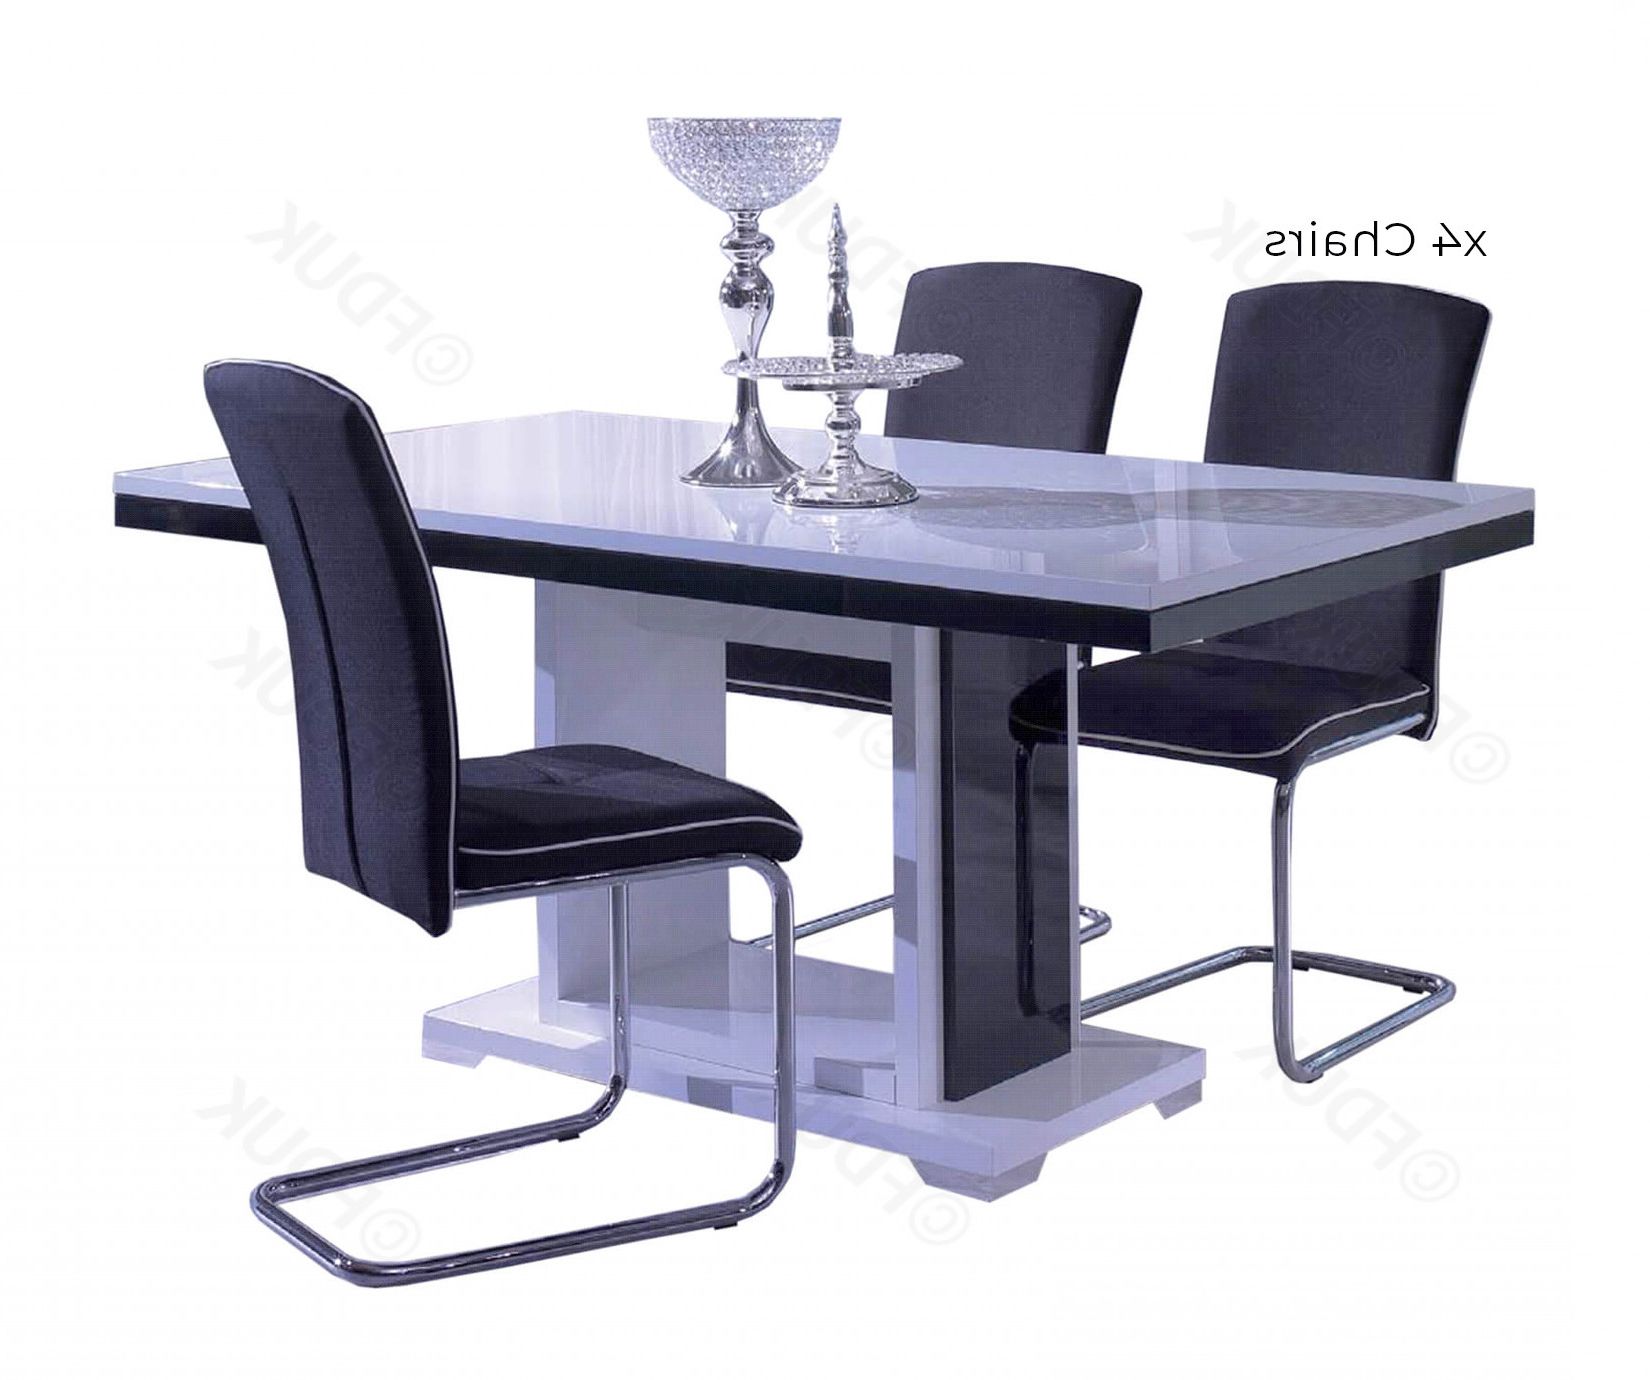 Most Recent Martino Dining Tables Inside San Martino Blazer Dining Table With 4 Chairs (View 11 of 25)